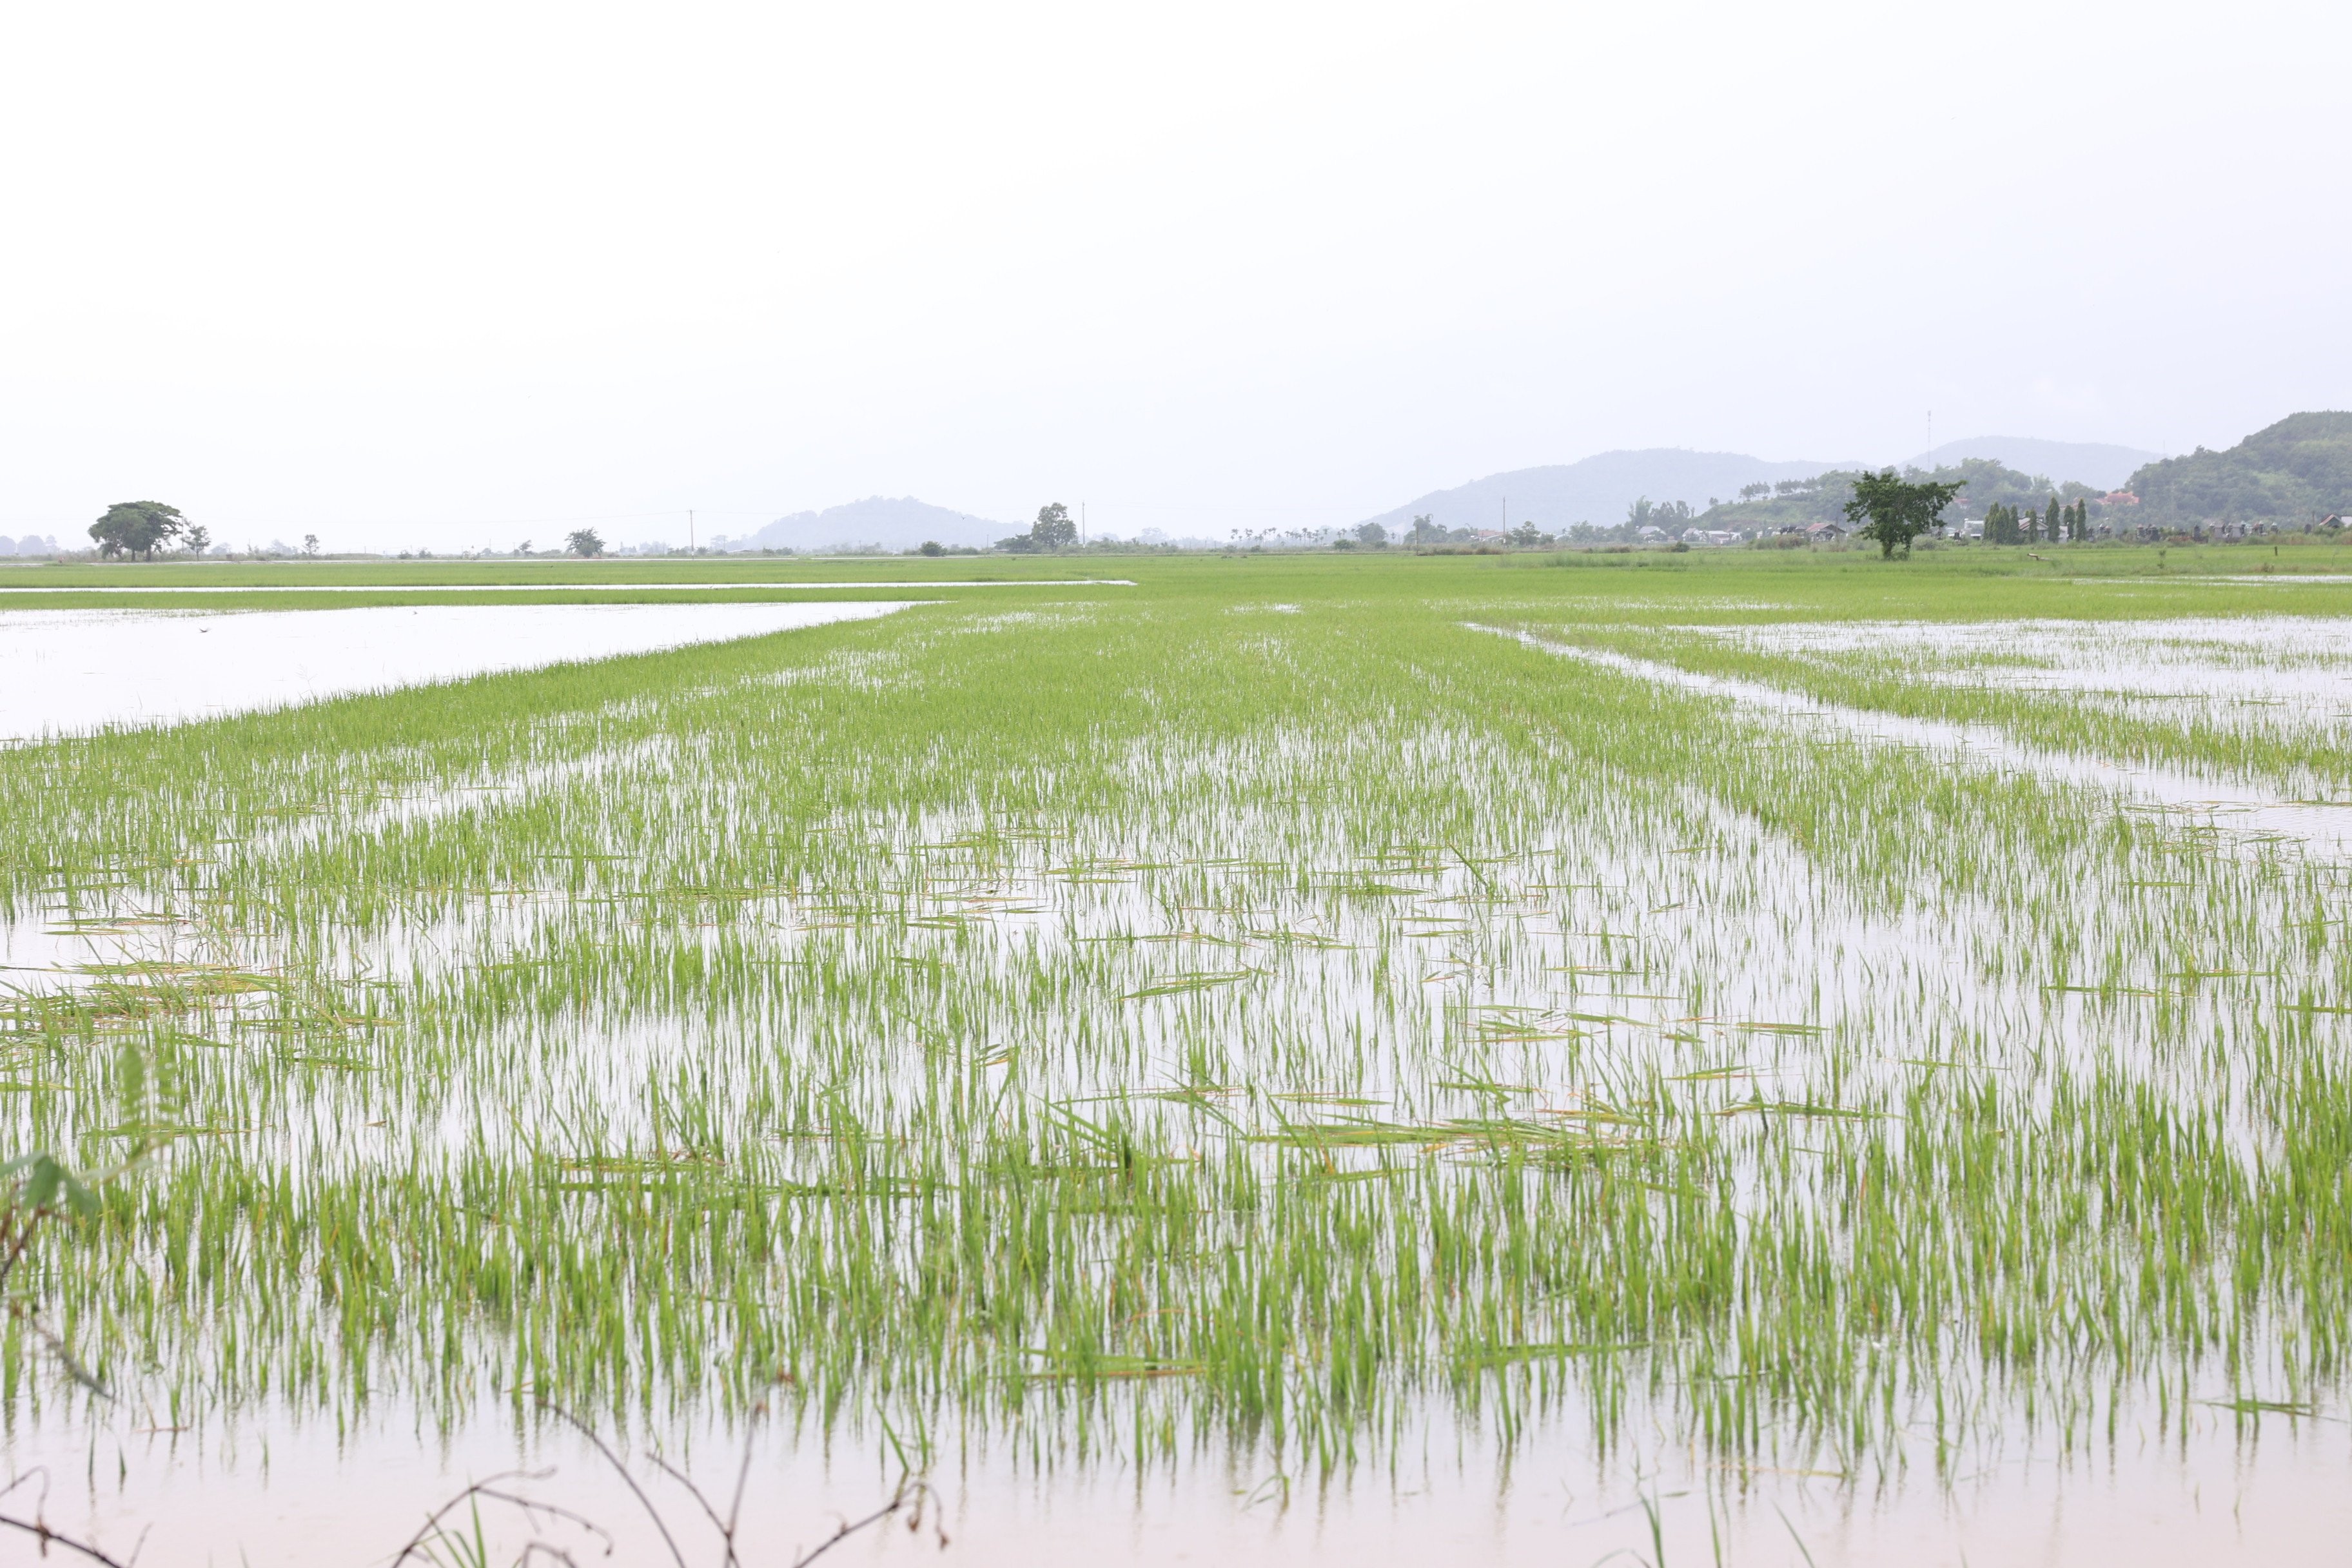 Heavy rain causes flooding in over 2,400 hectares of crops